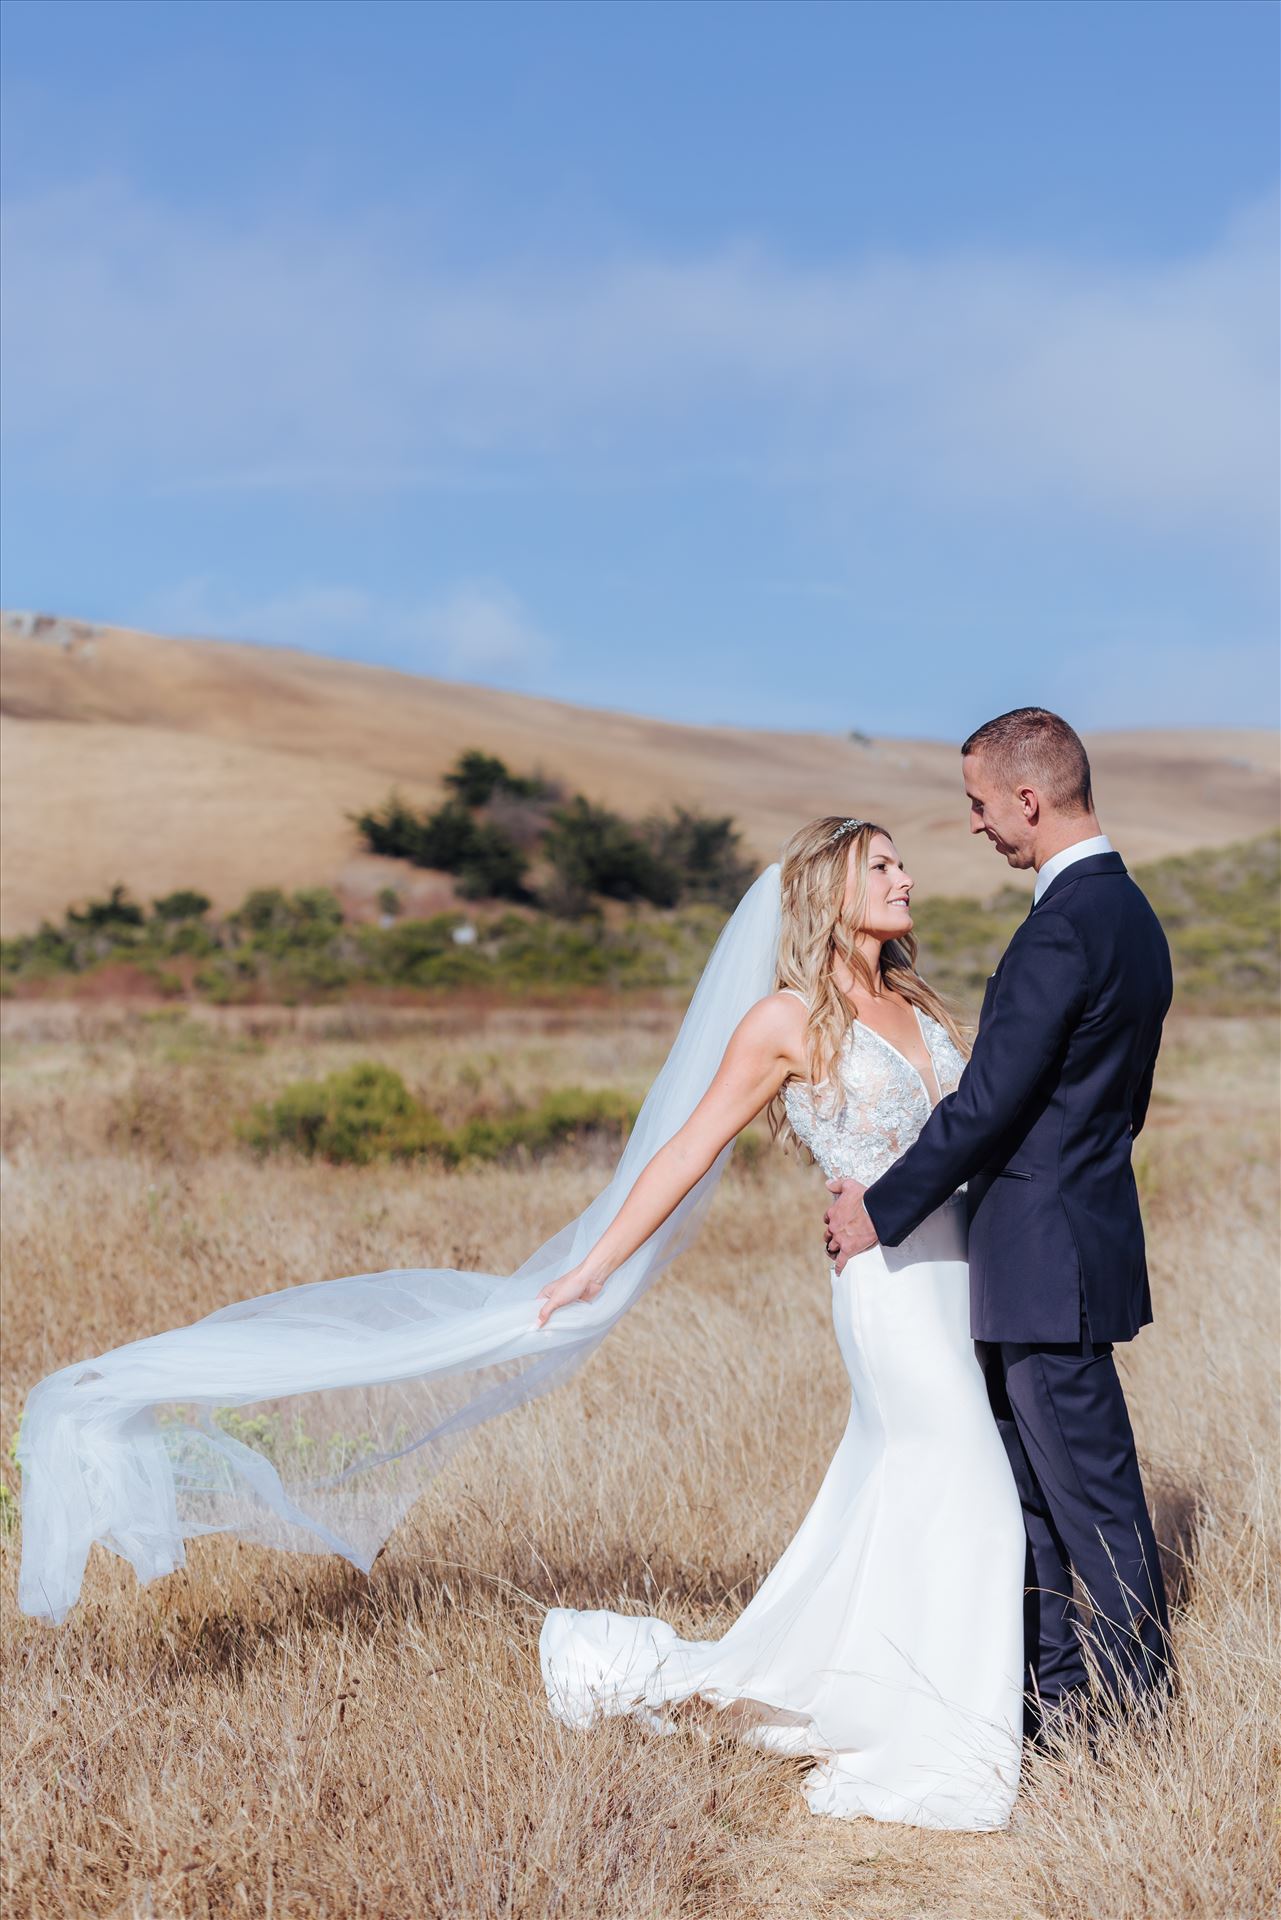 Courtney and Doug 50 - Mirror's Edge Photography, San Luis Obispo Wedding Photographer captures Cayucos Wedding on the beach and bluffs in Cayucos Central California Coast. Northern and Central California San Luis Obispo County Bride and Groom by Sarah Williams